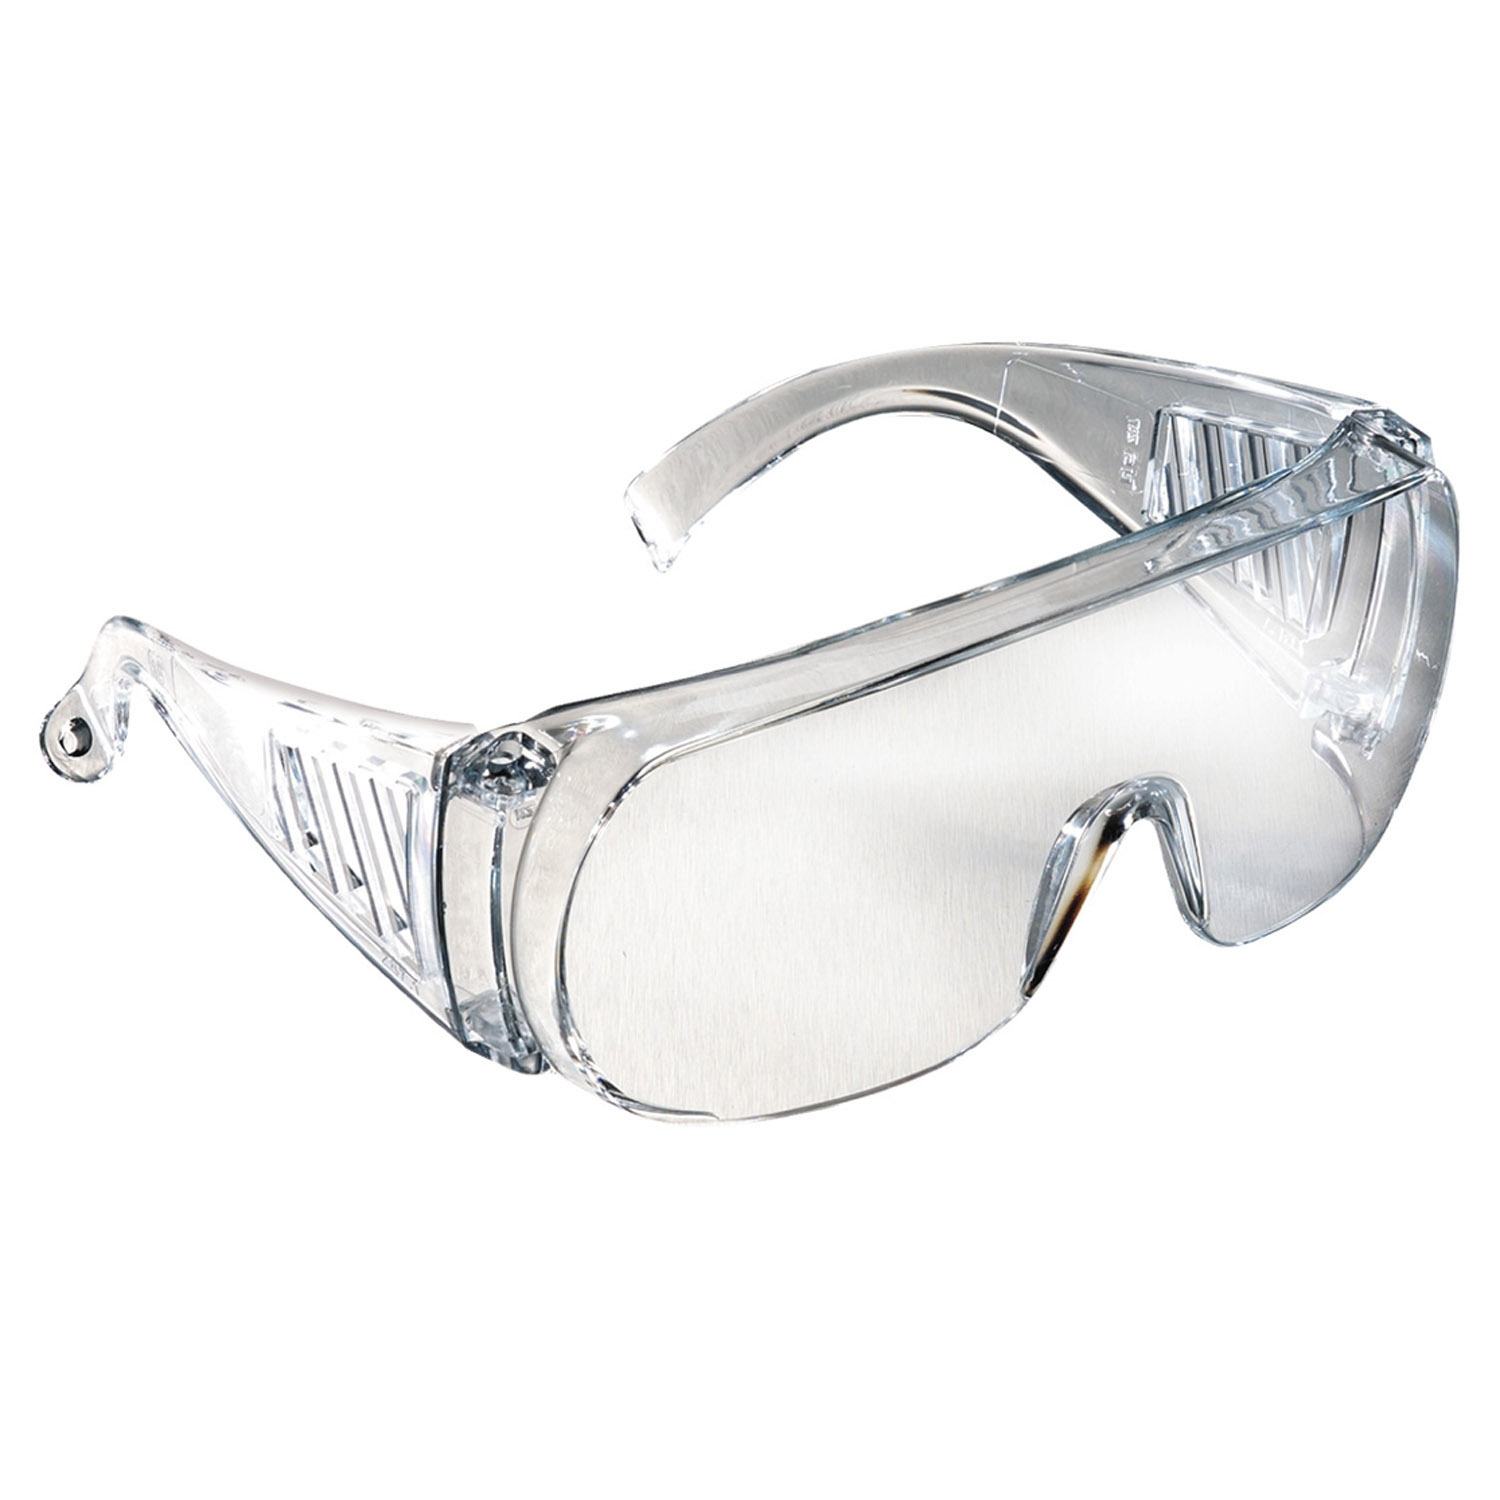 RADIANS - COVERALLS SHOOTING GLASSES